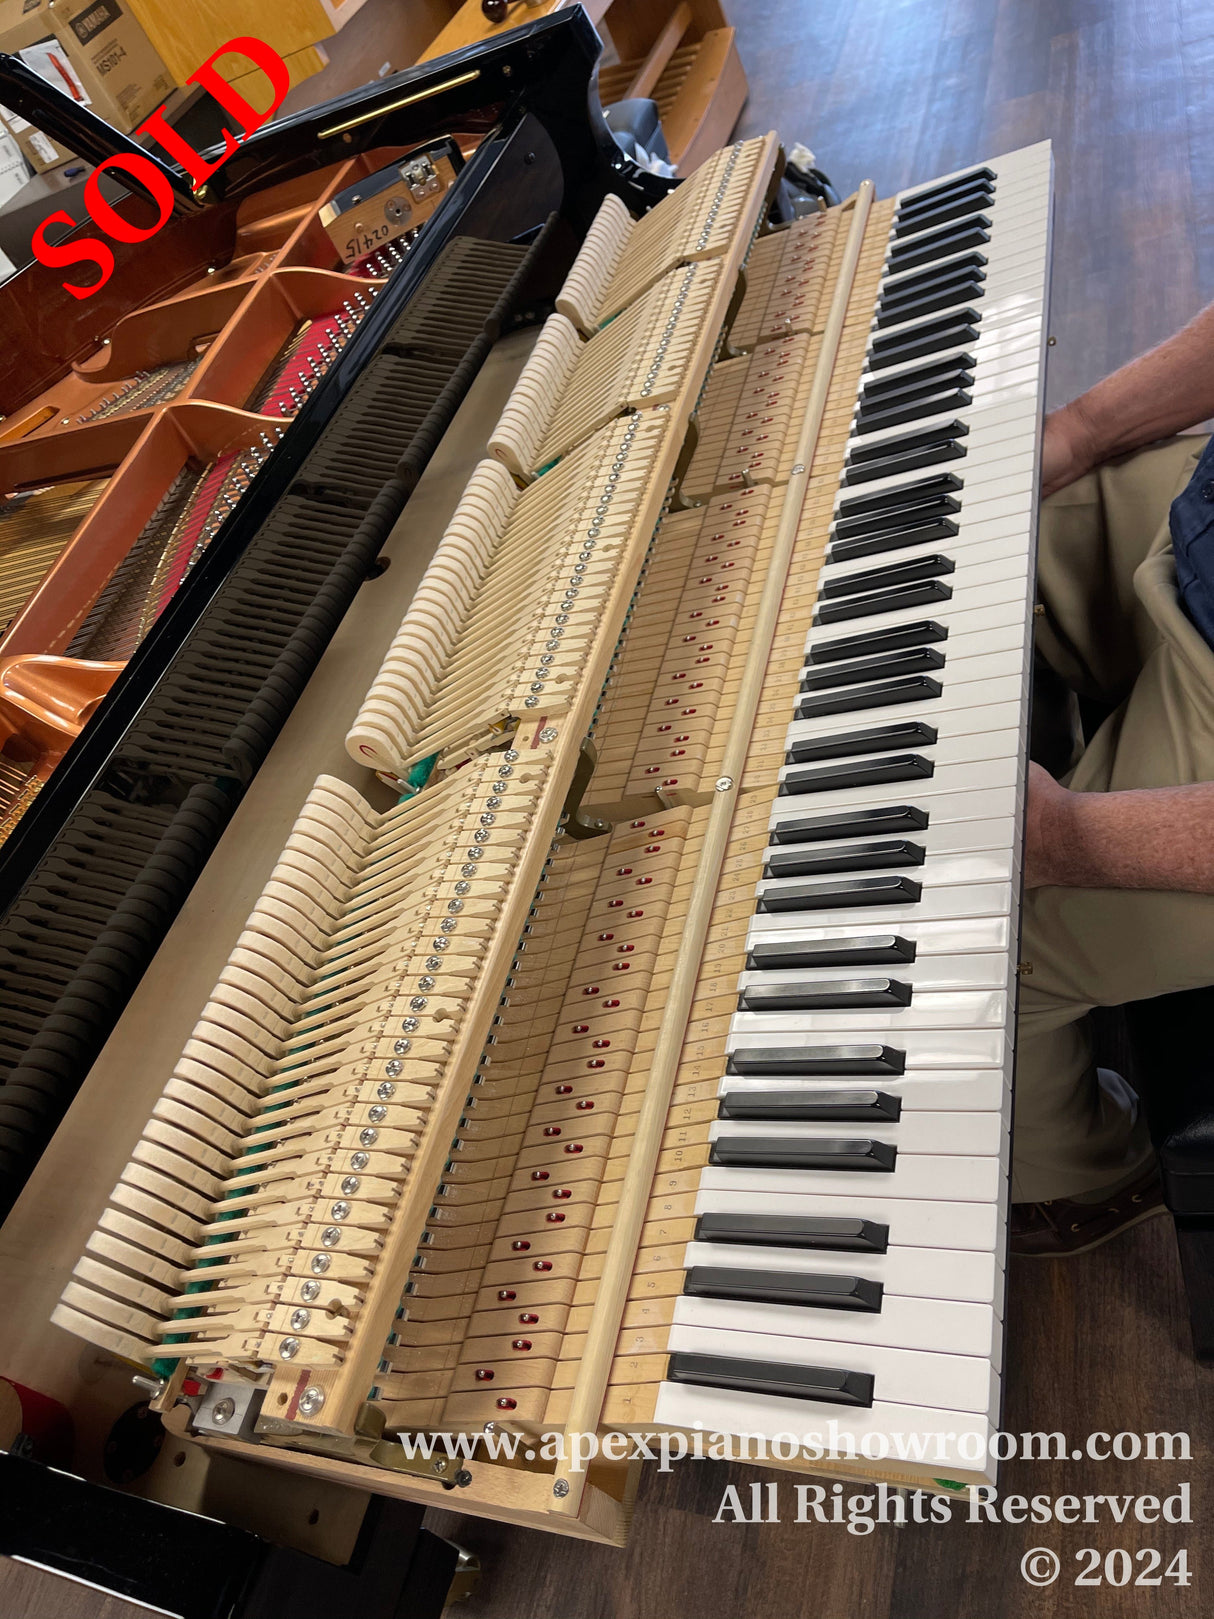 Grand piano with its action removed and placed next to the keyboard, showcasing the hammers and dampers, in a piano showroom with hardwood floors.